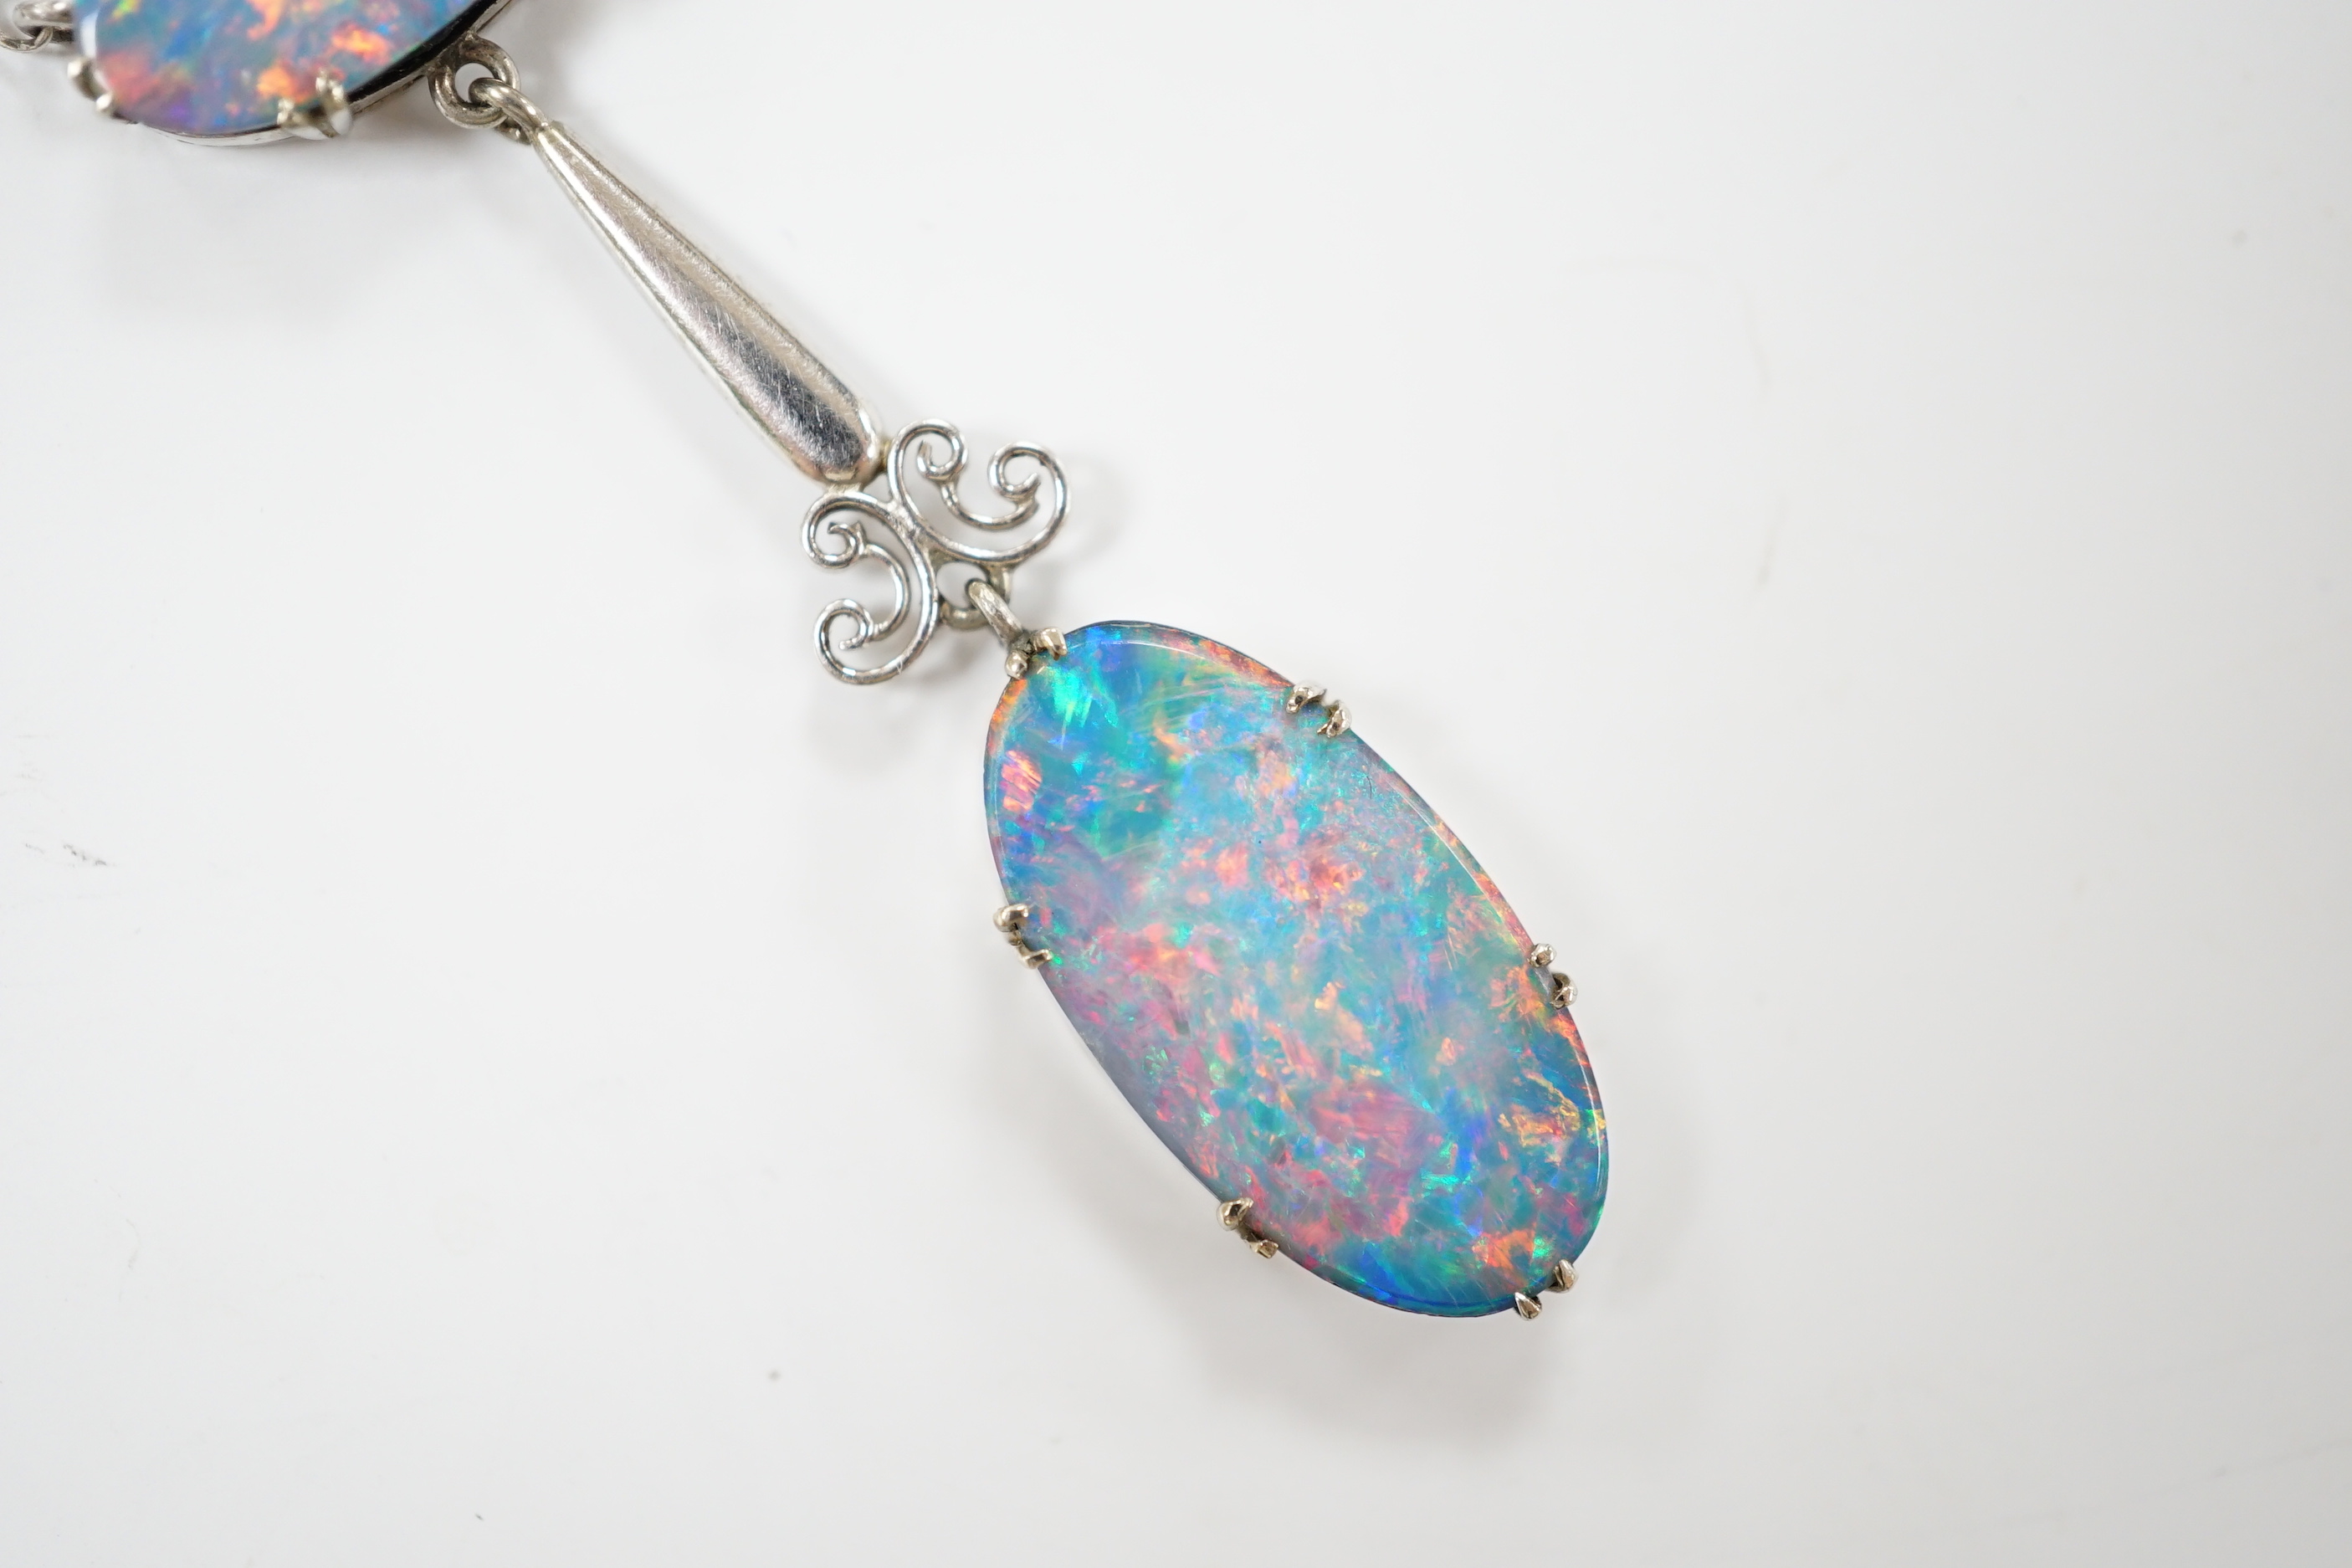 A 1920's style 9ct white metal and two stone black opal doublet set drop pendant necklace, overall 58cm, gross weight 4 grams.